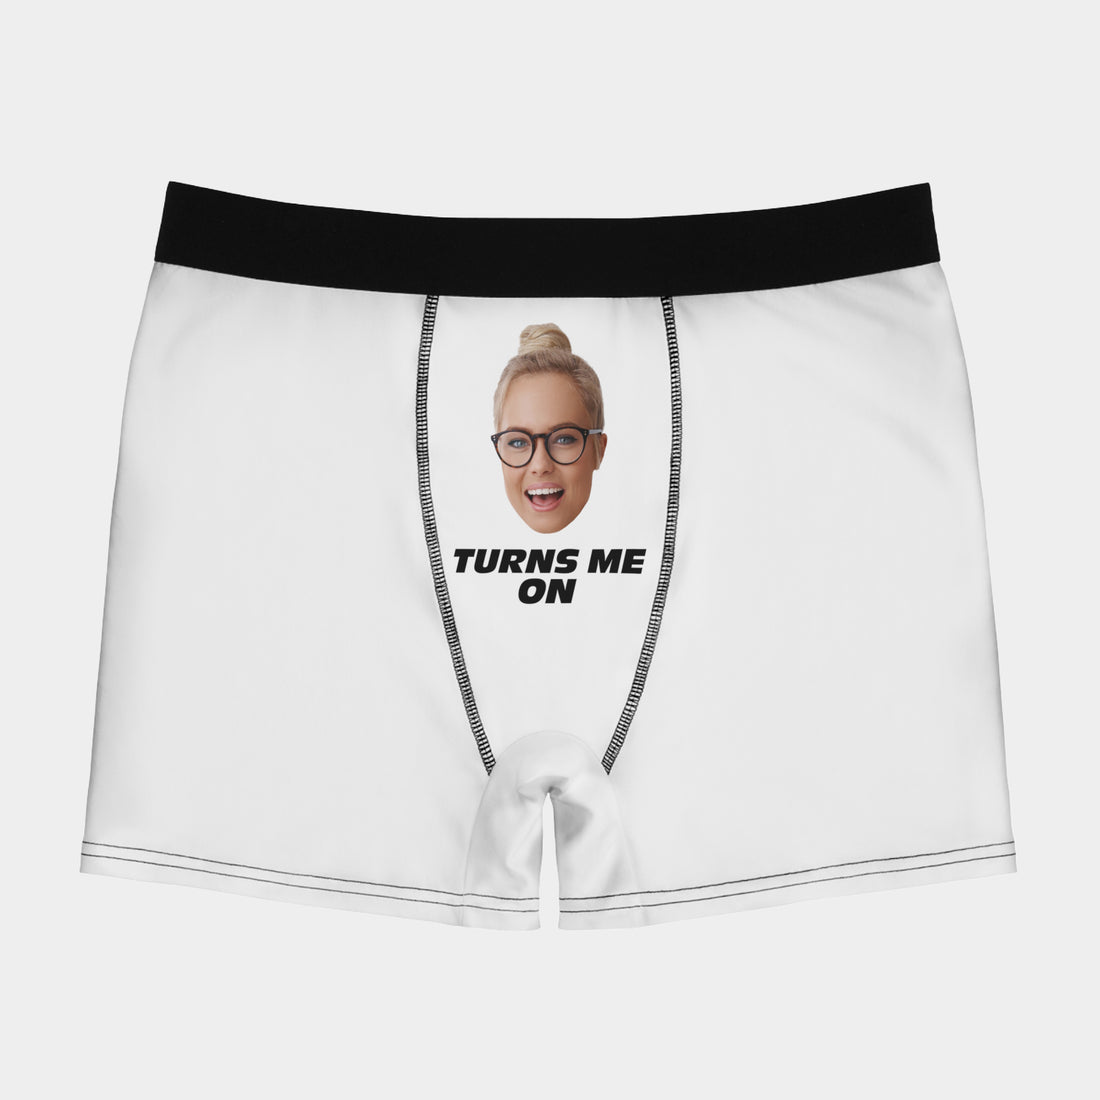 Spicy Personalized Boxers For Men With Face Photo